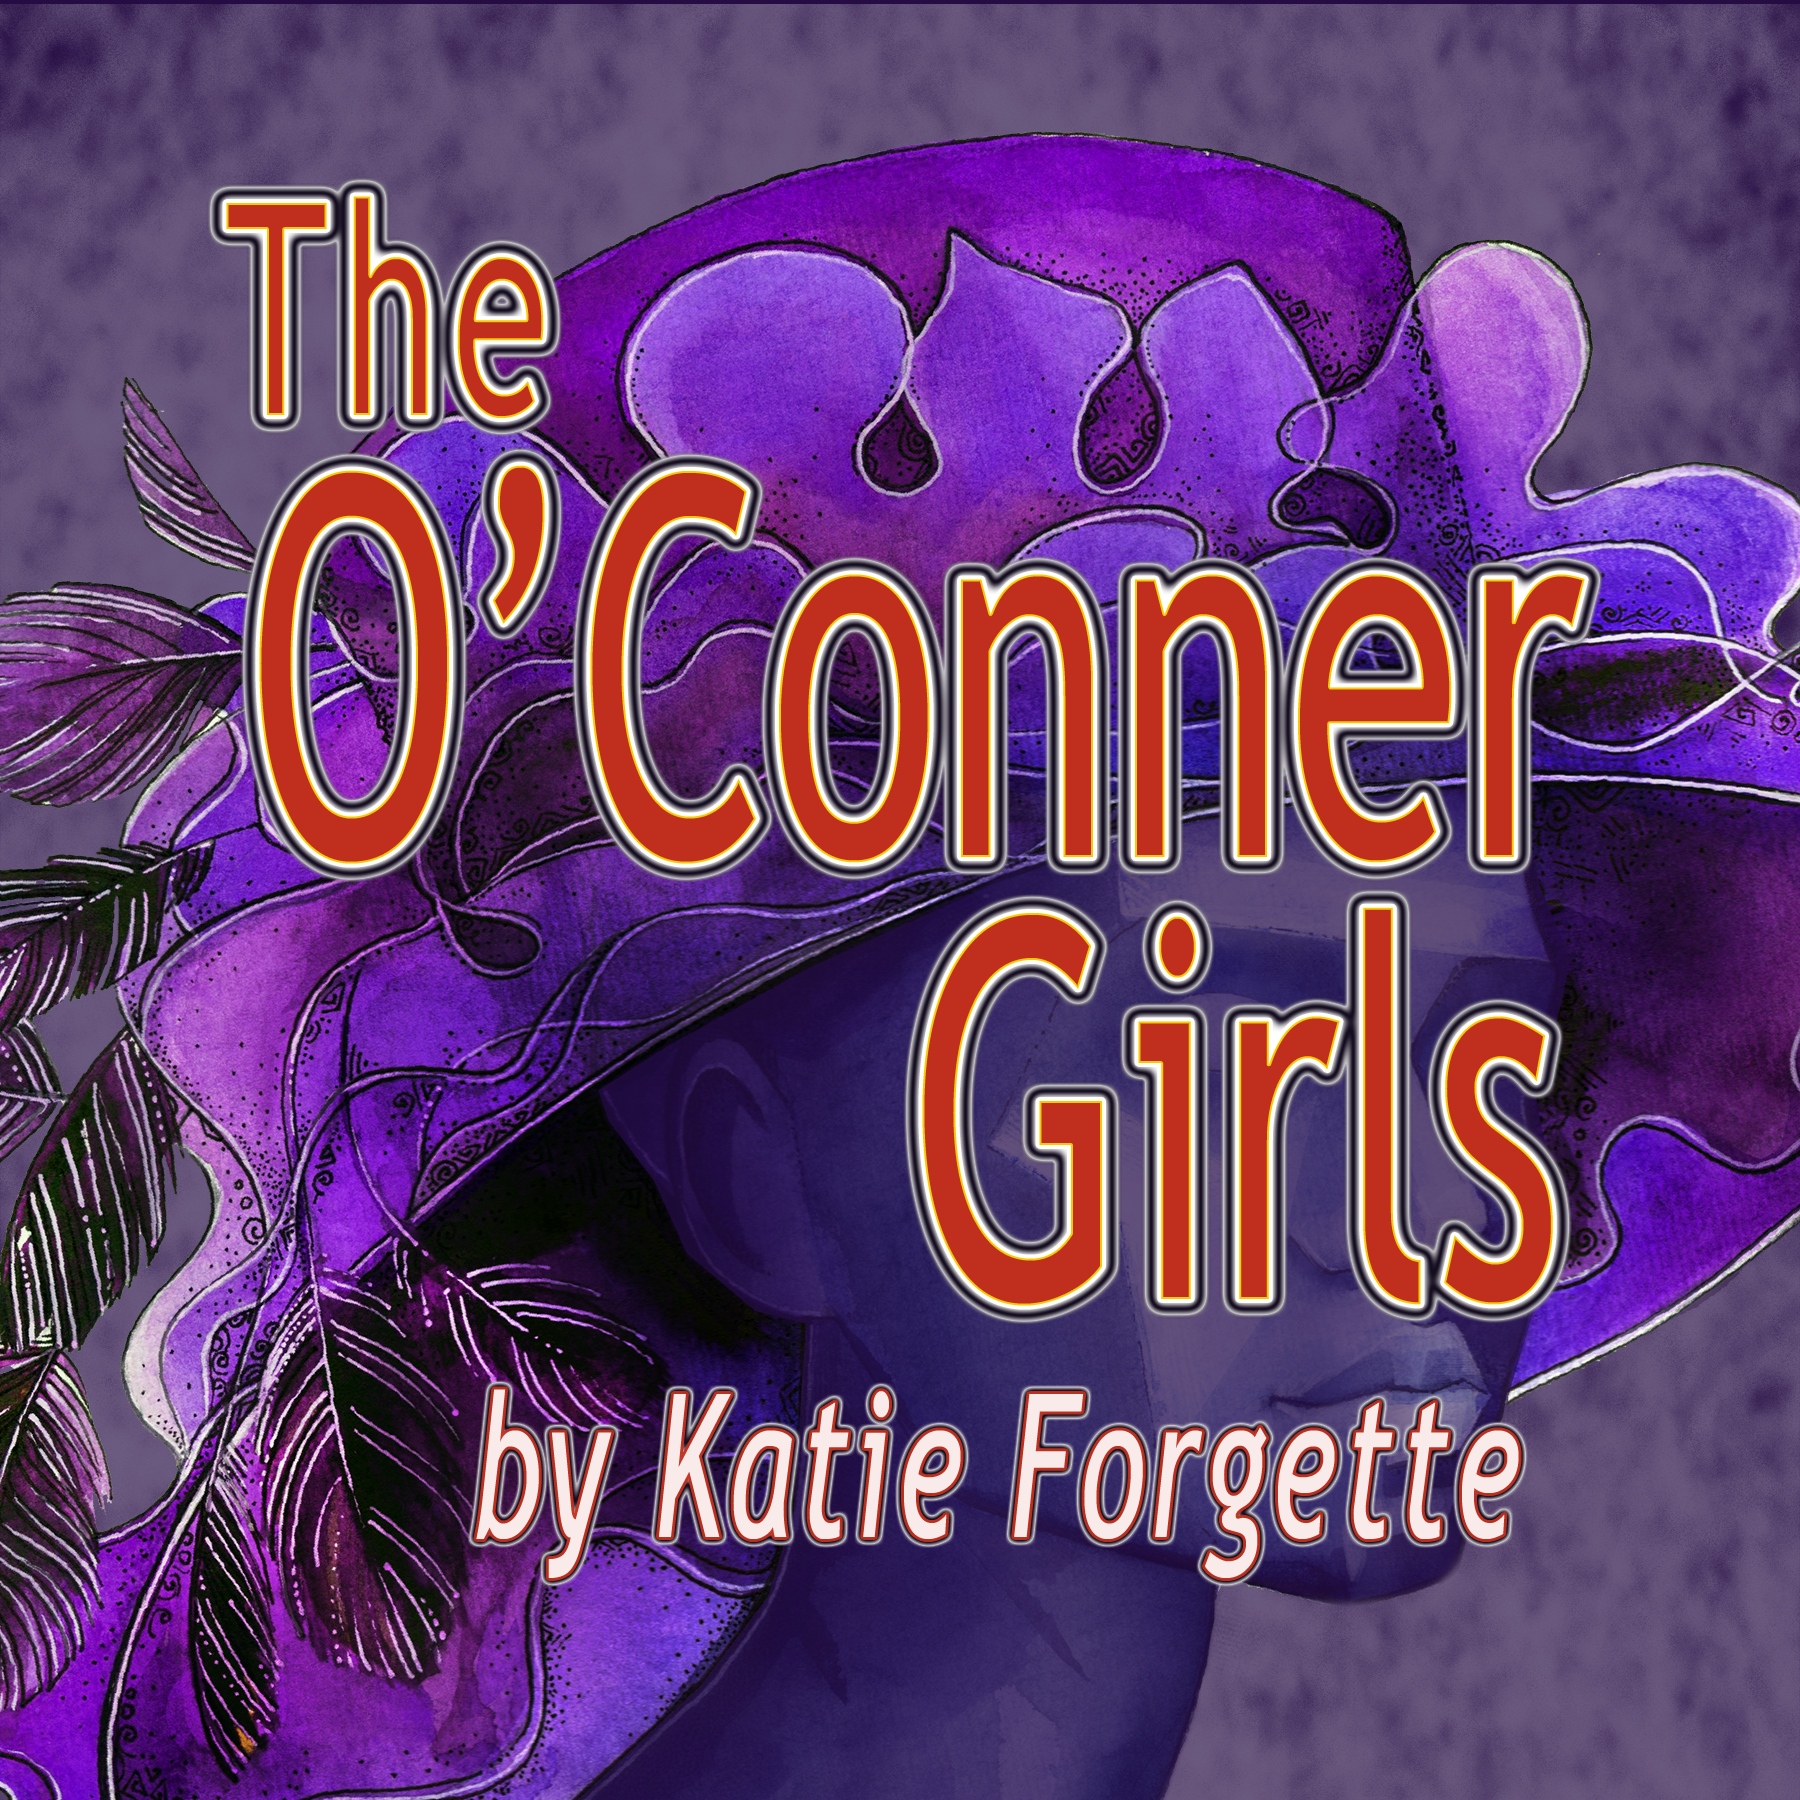 Artwork for The O'Conner Girls  by Katie Forgette
